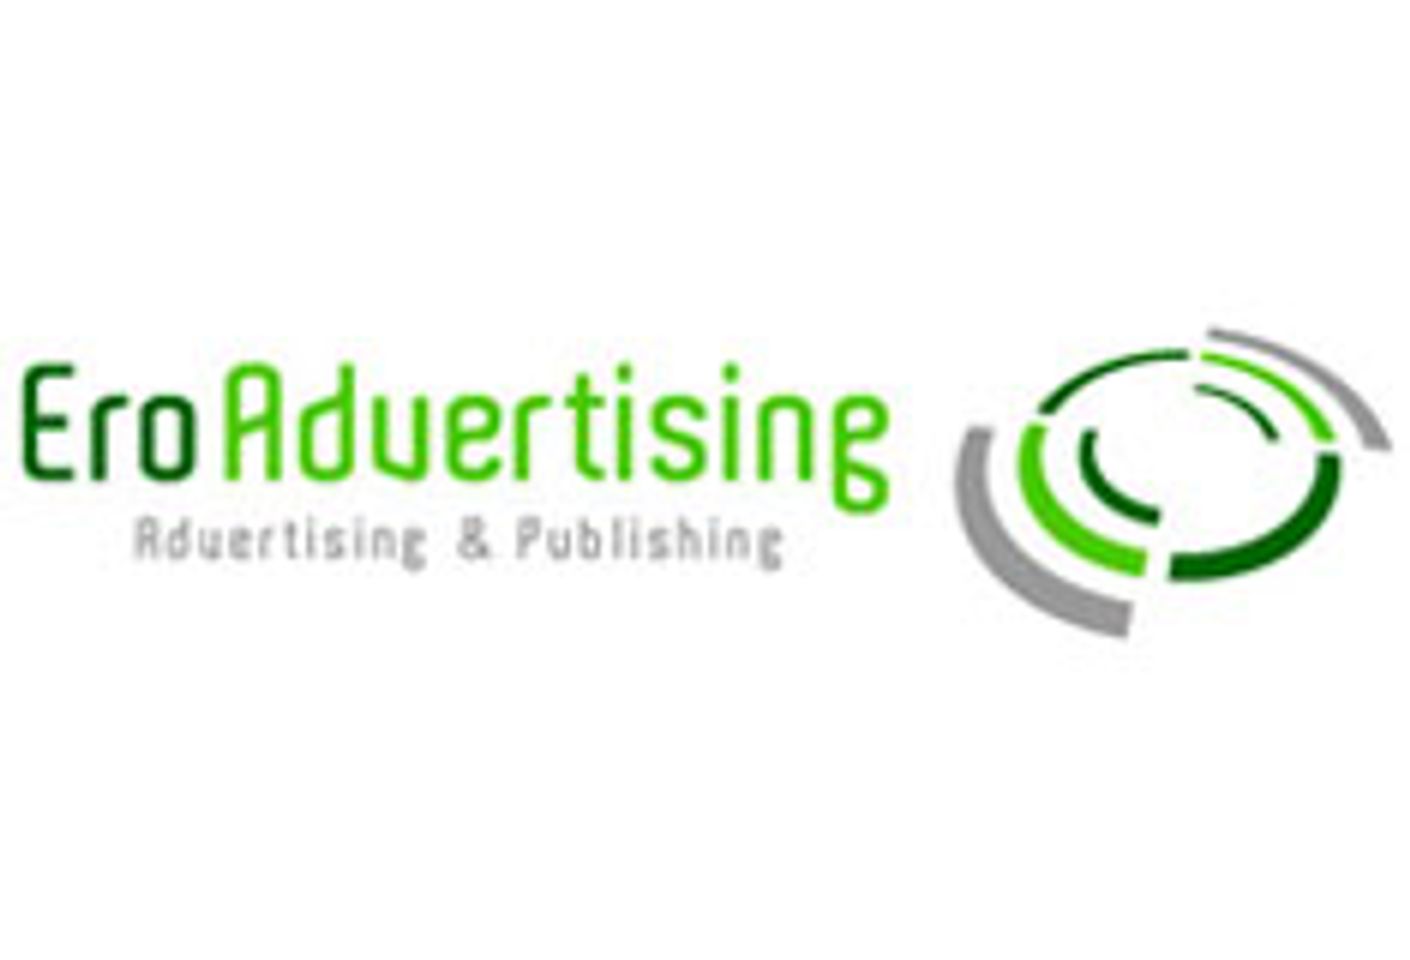 EroAdvertising to Introduce New System Features Before Year's End